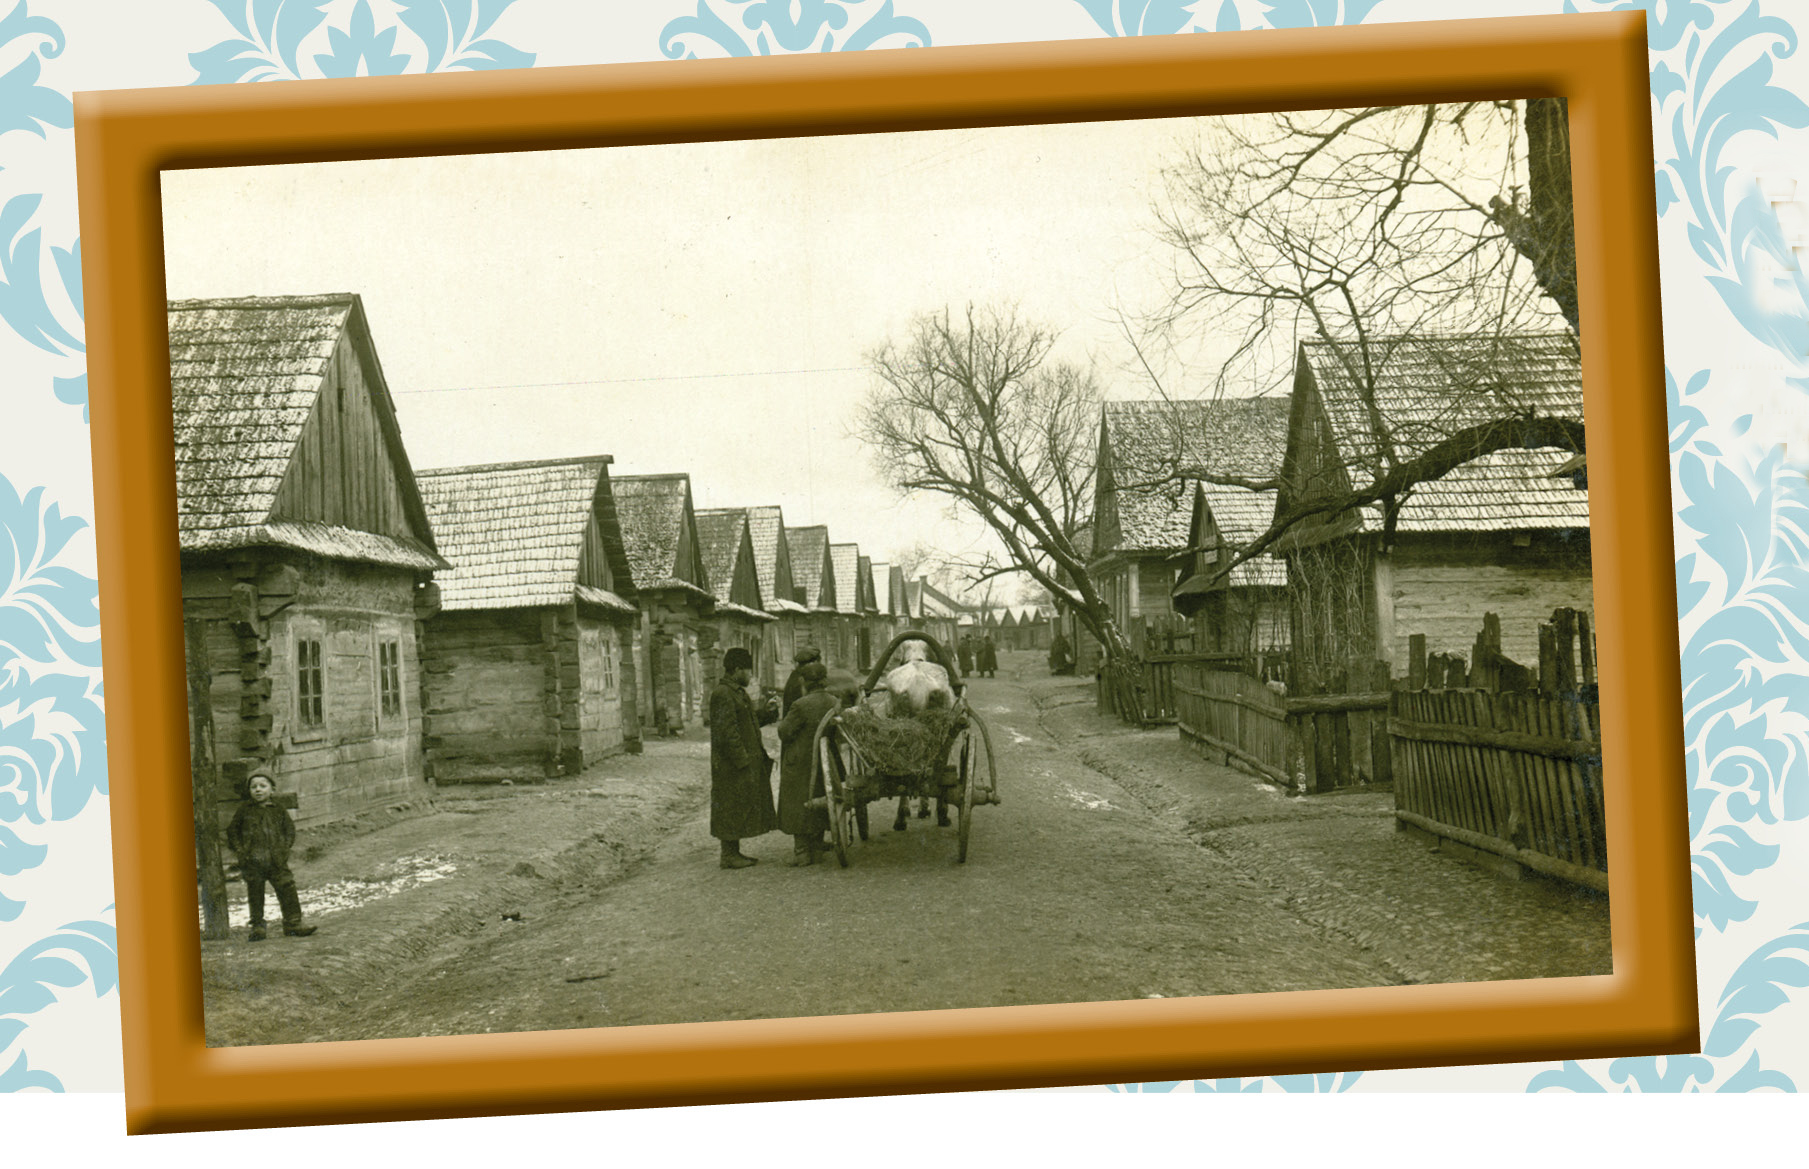 A village near the town of Pruzhany, Belorussia, autumn 1916. Unknown German photographer. The Oster Visual Documentation Center, ANU – Museum of the Jewish People, courtesy of Gamal LTD., Kibbutz Sarid